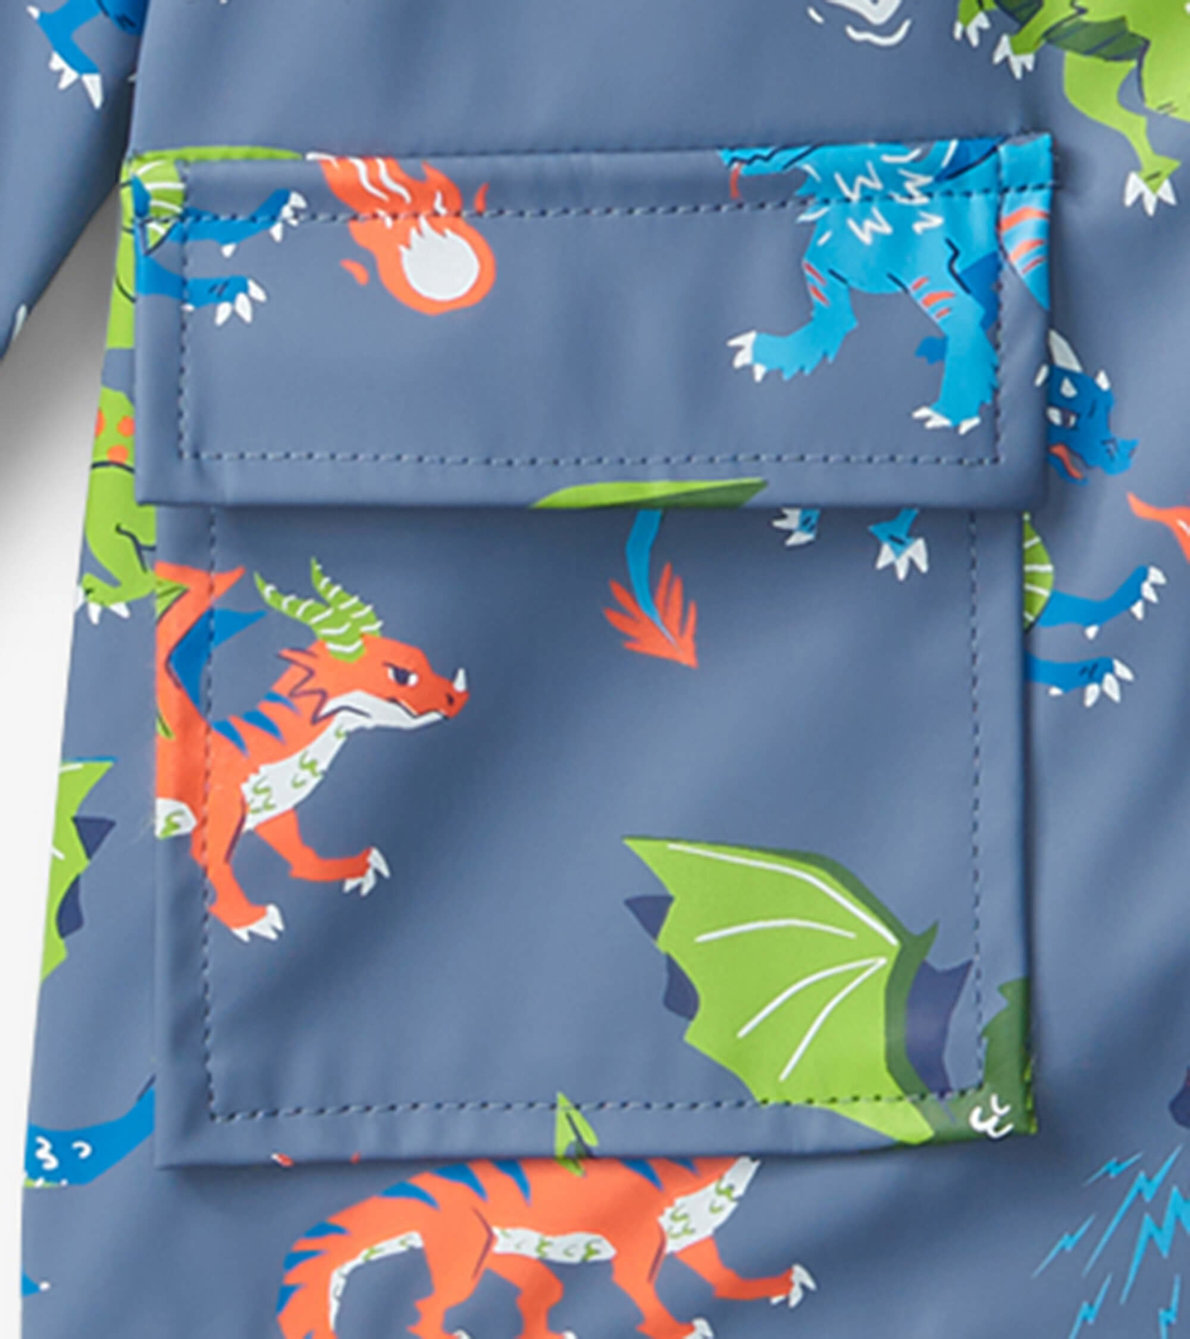 View larger image of Dragon Realm Kids Raincoat